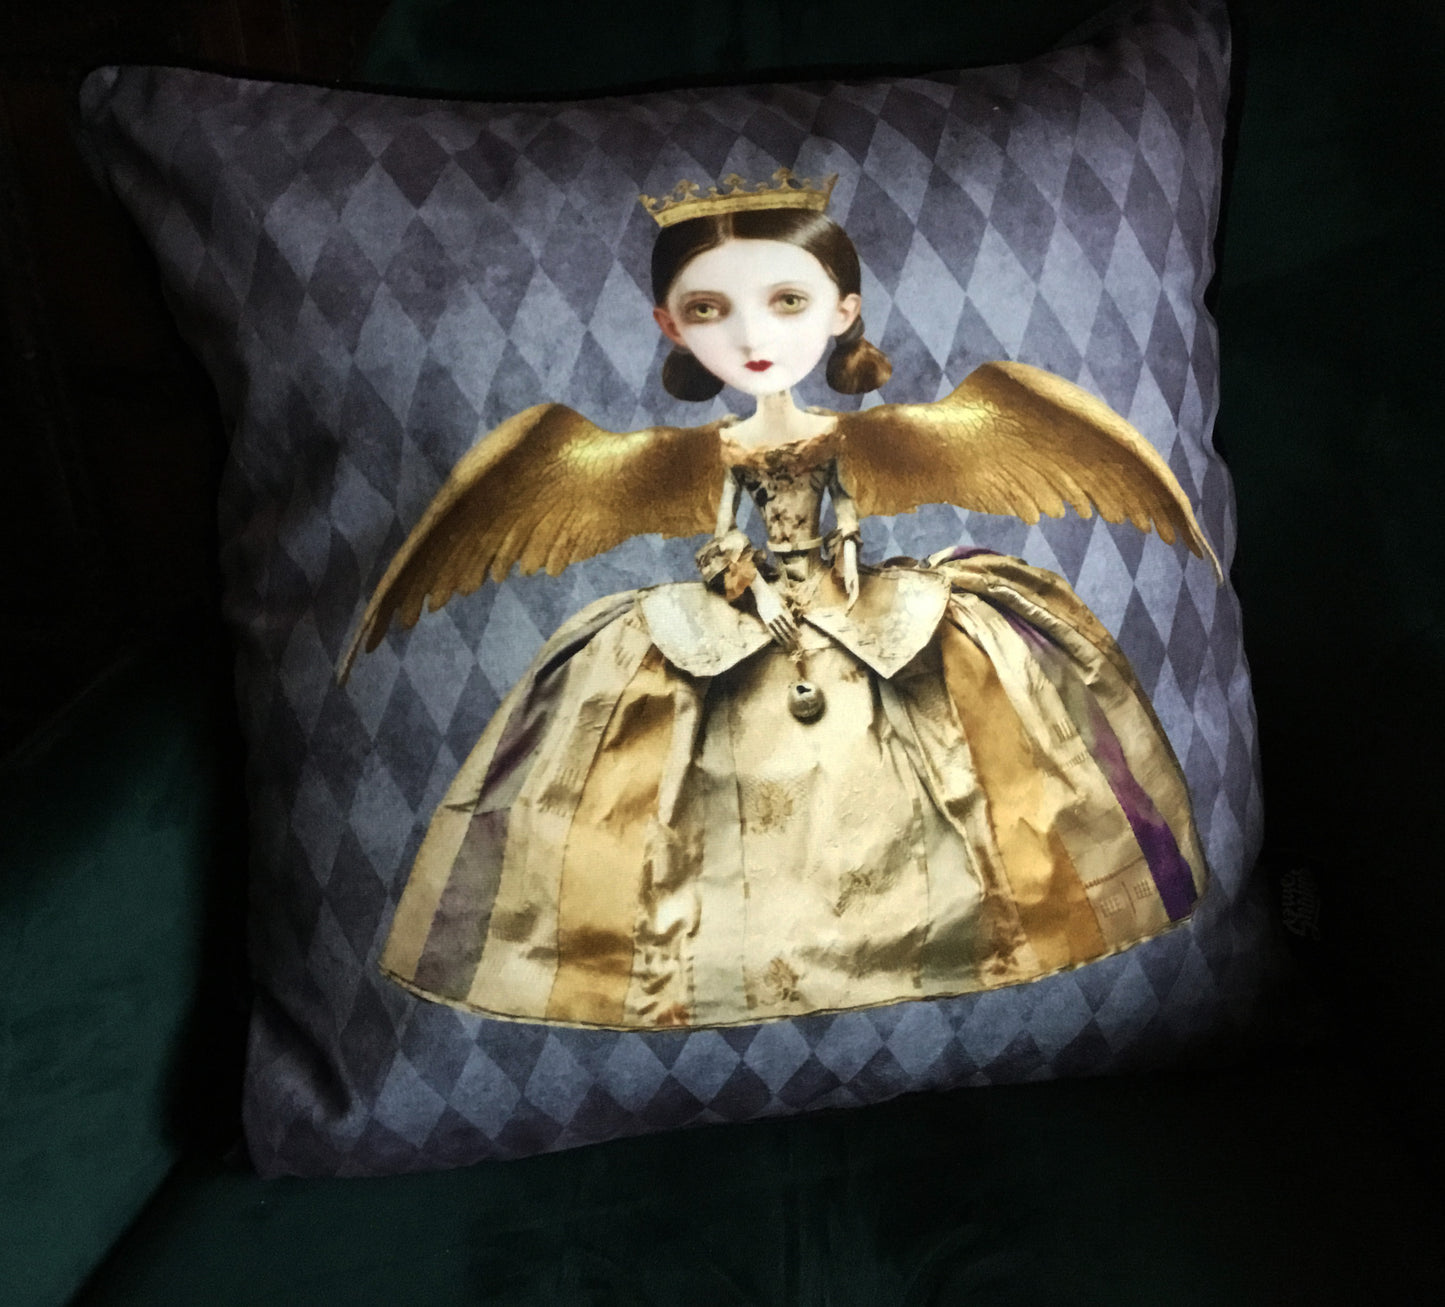 Cushions -  Paperdoll Gold 1